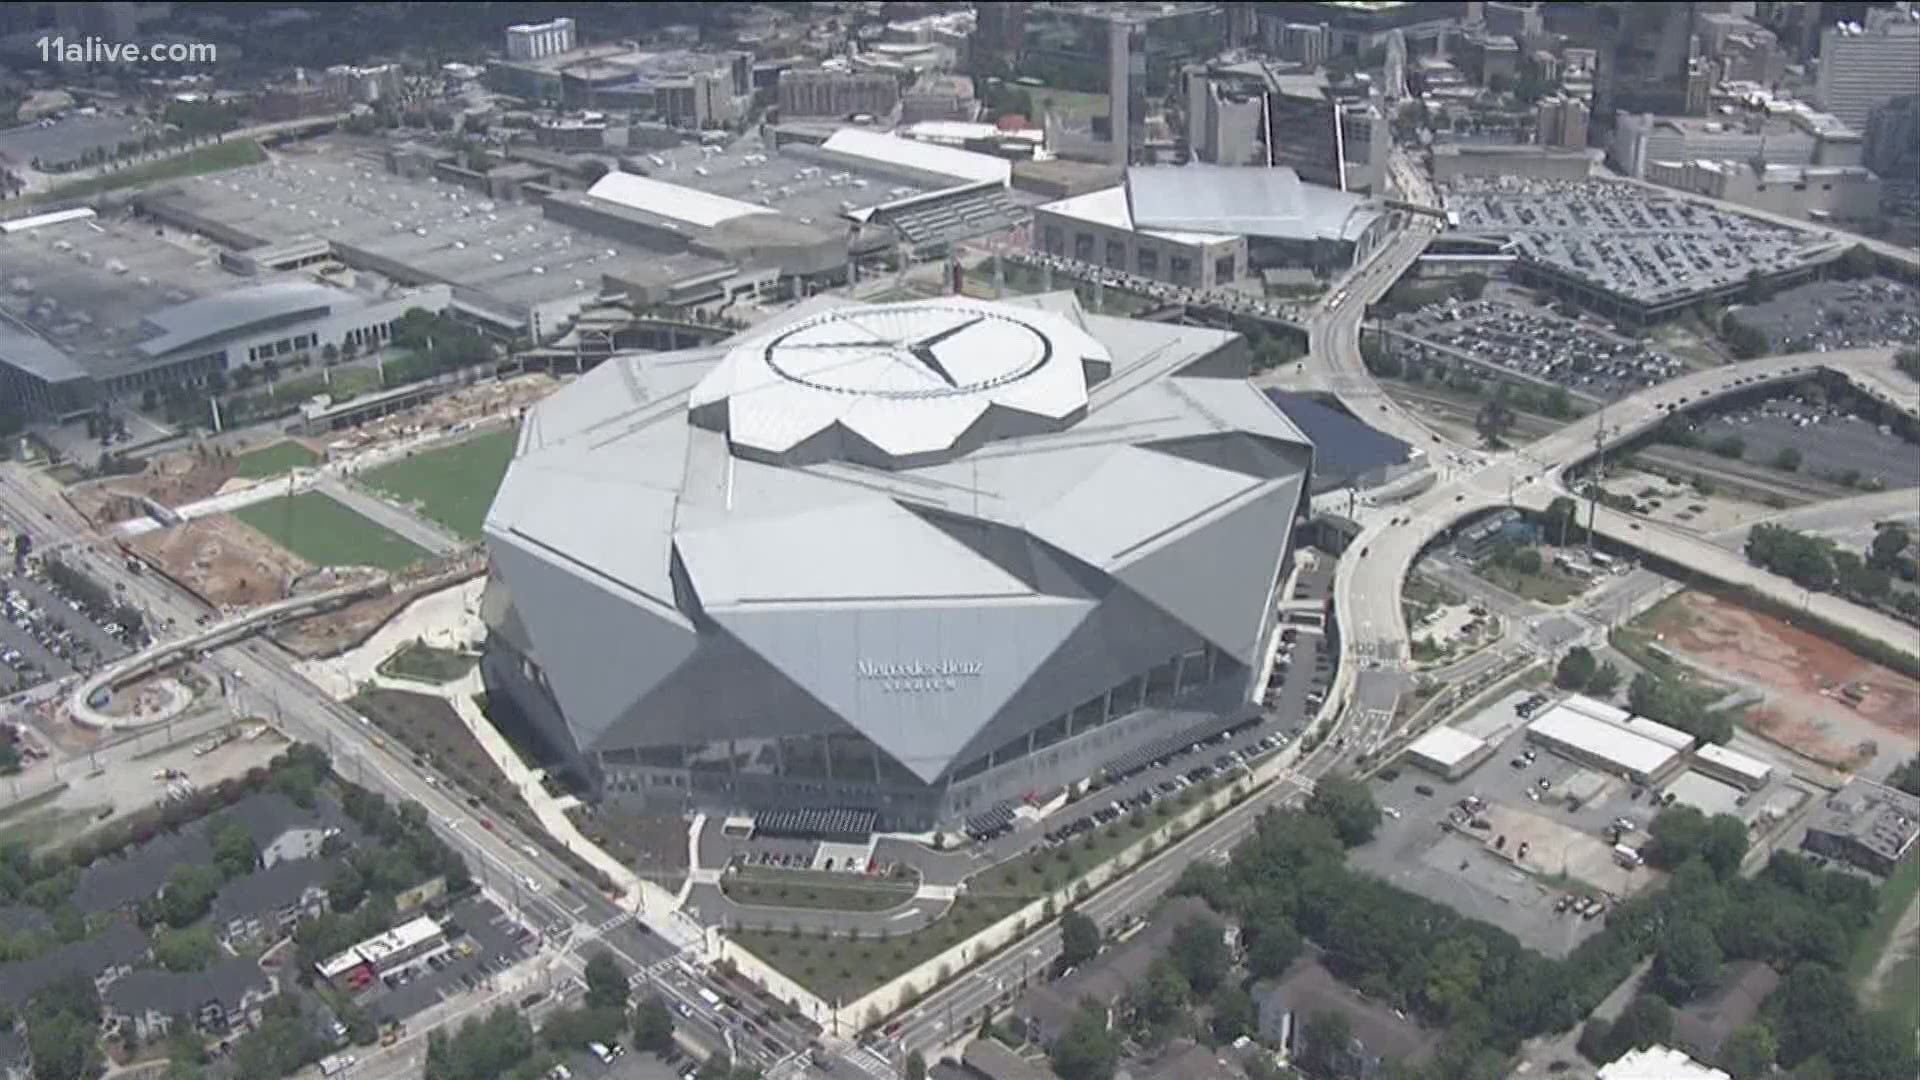 The president of the Atlanta Sports Council said it could be bigger than the Olympics if Atlanta gets to host.